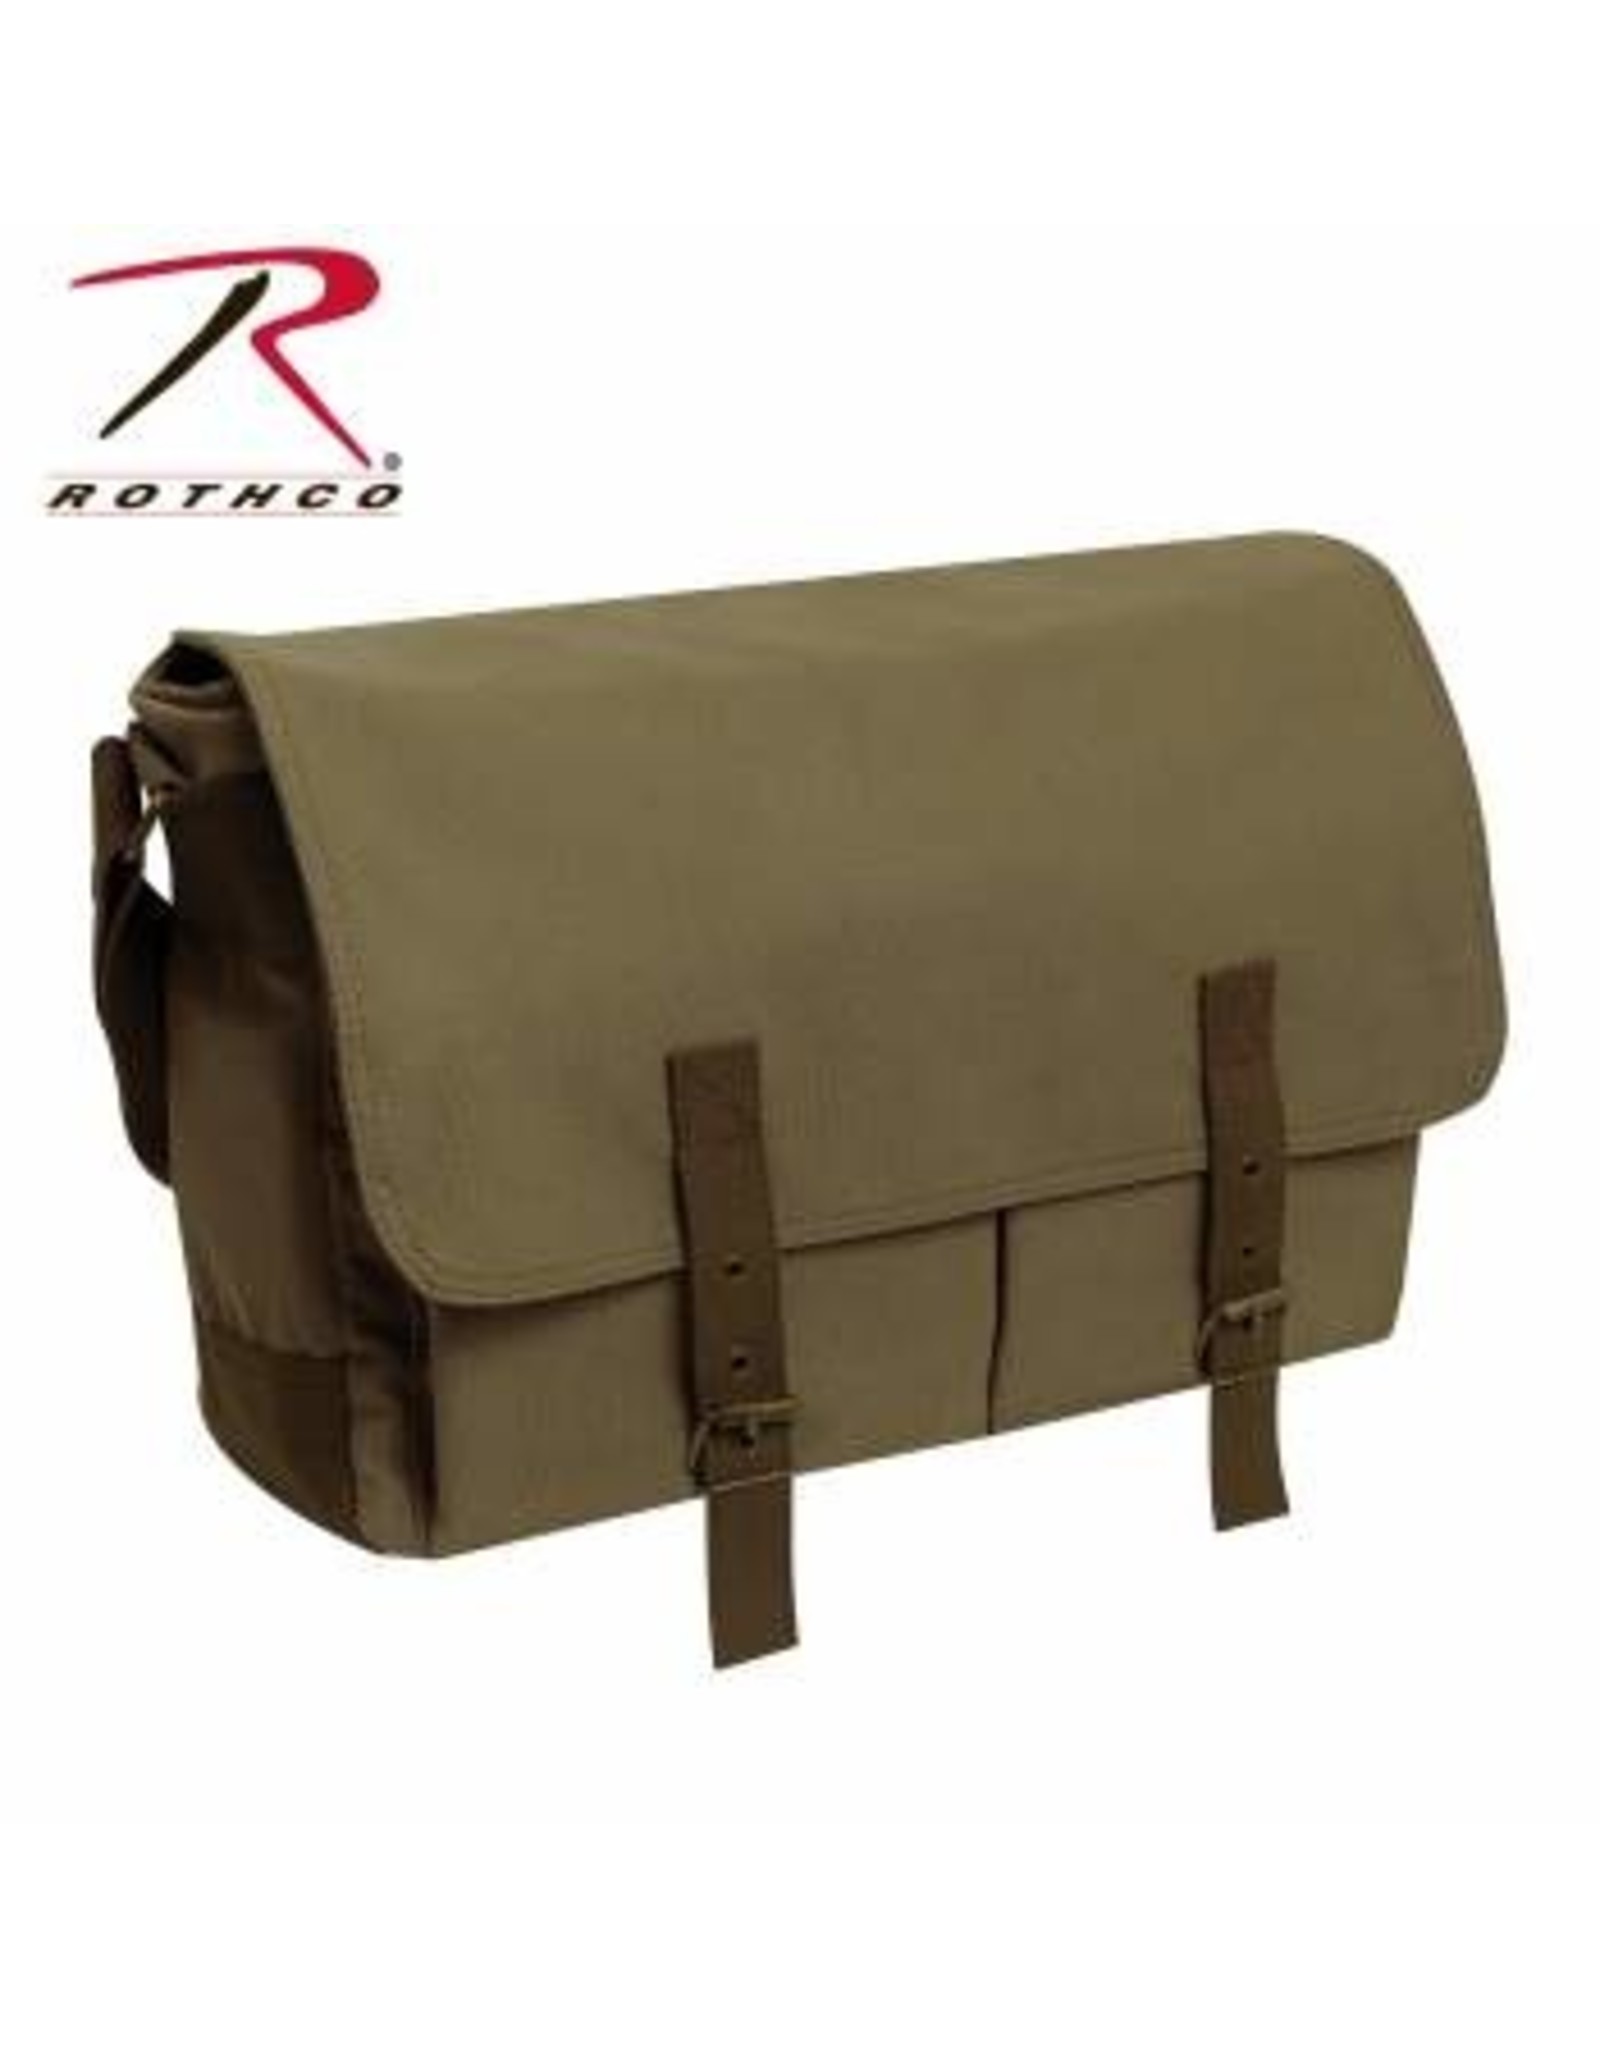 ROTHCO DELUXE VINTAGE CANVAS MESSENGER BAG-OLIVE